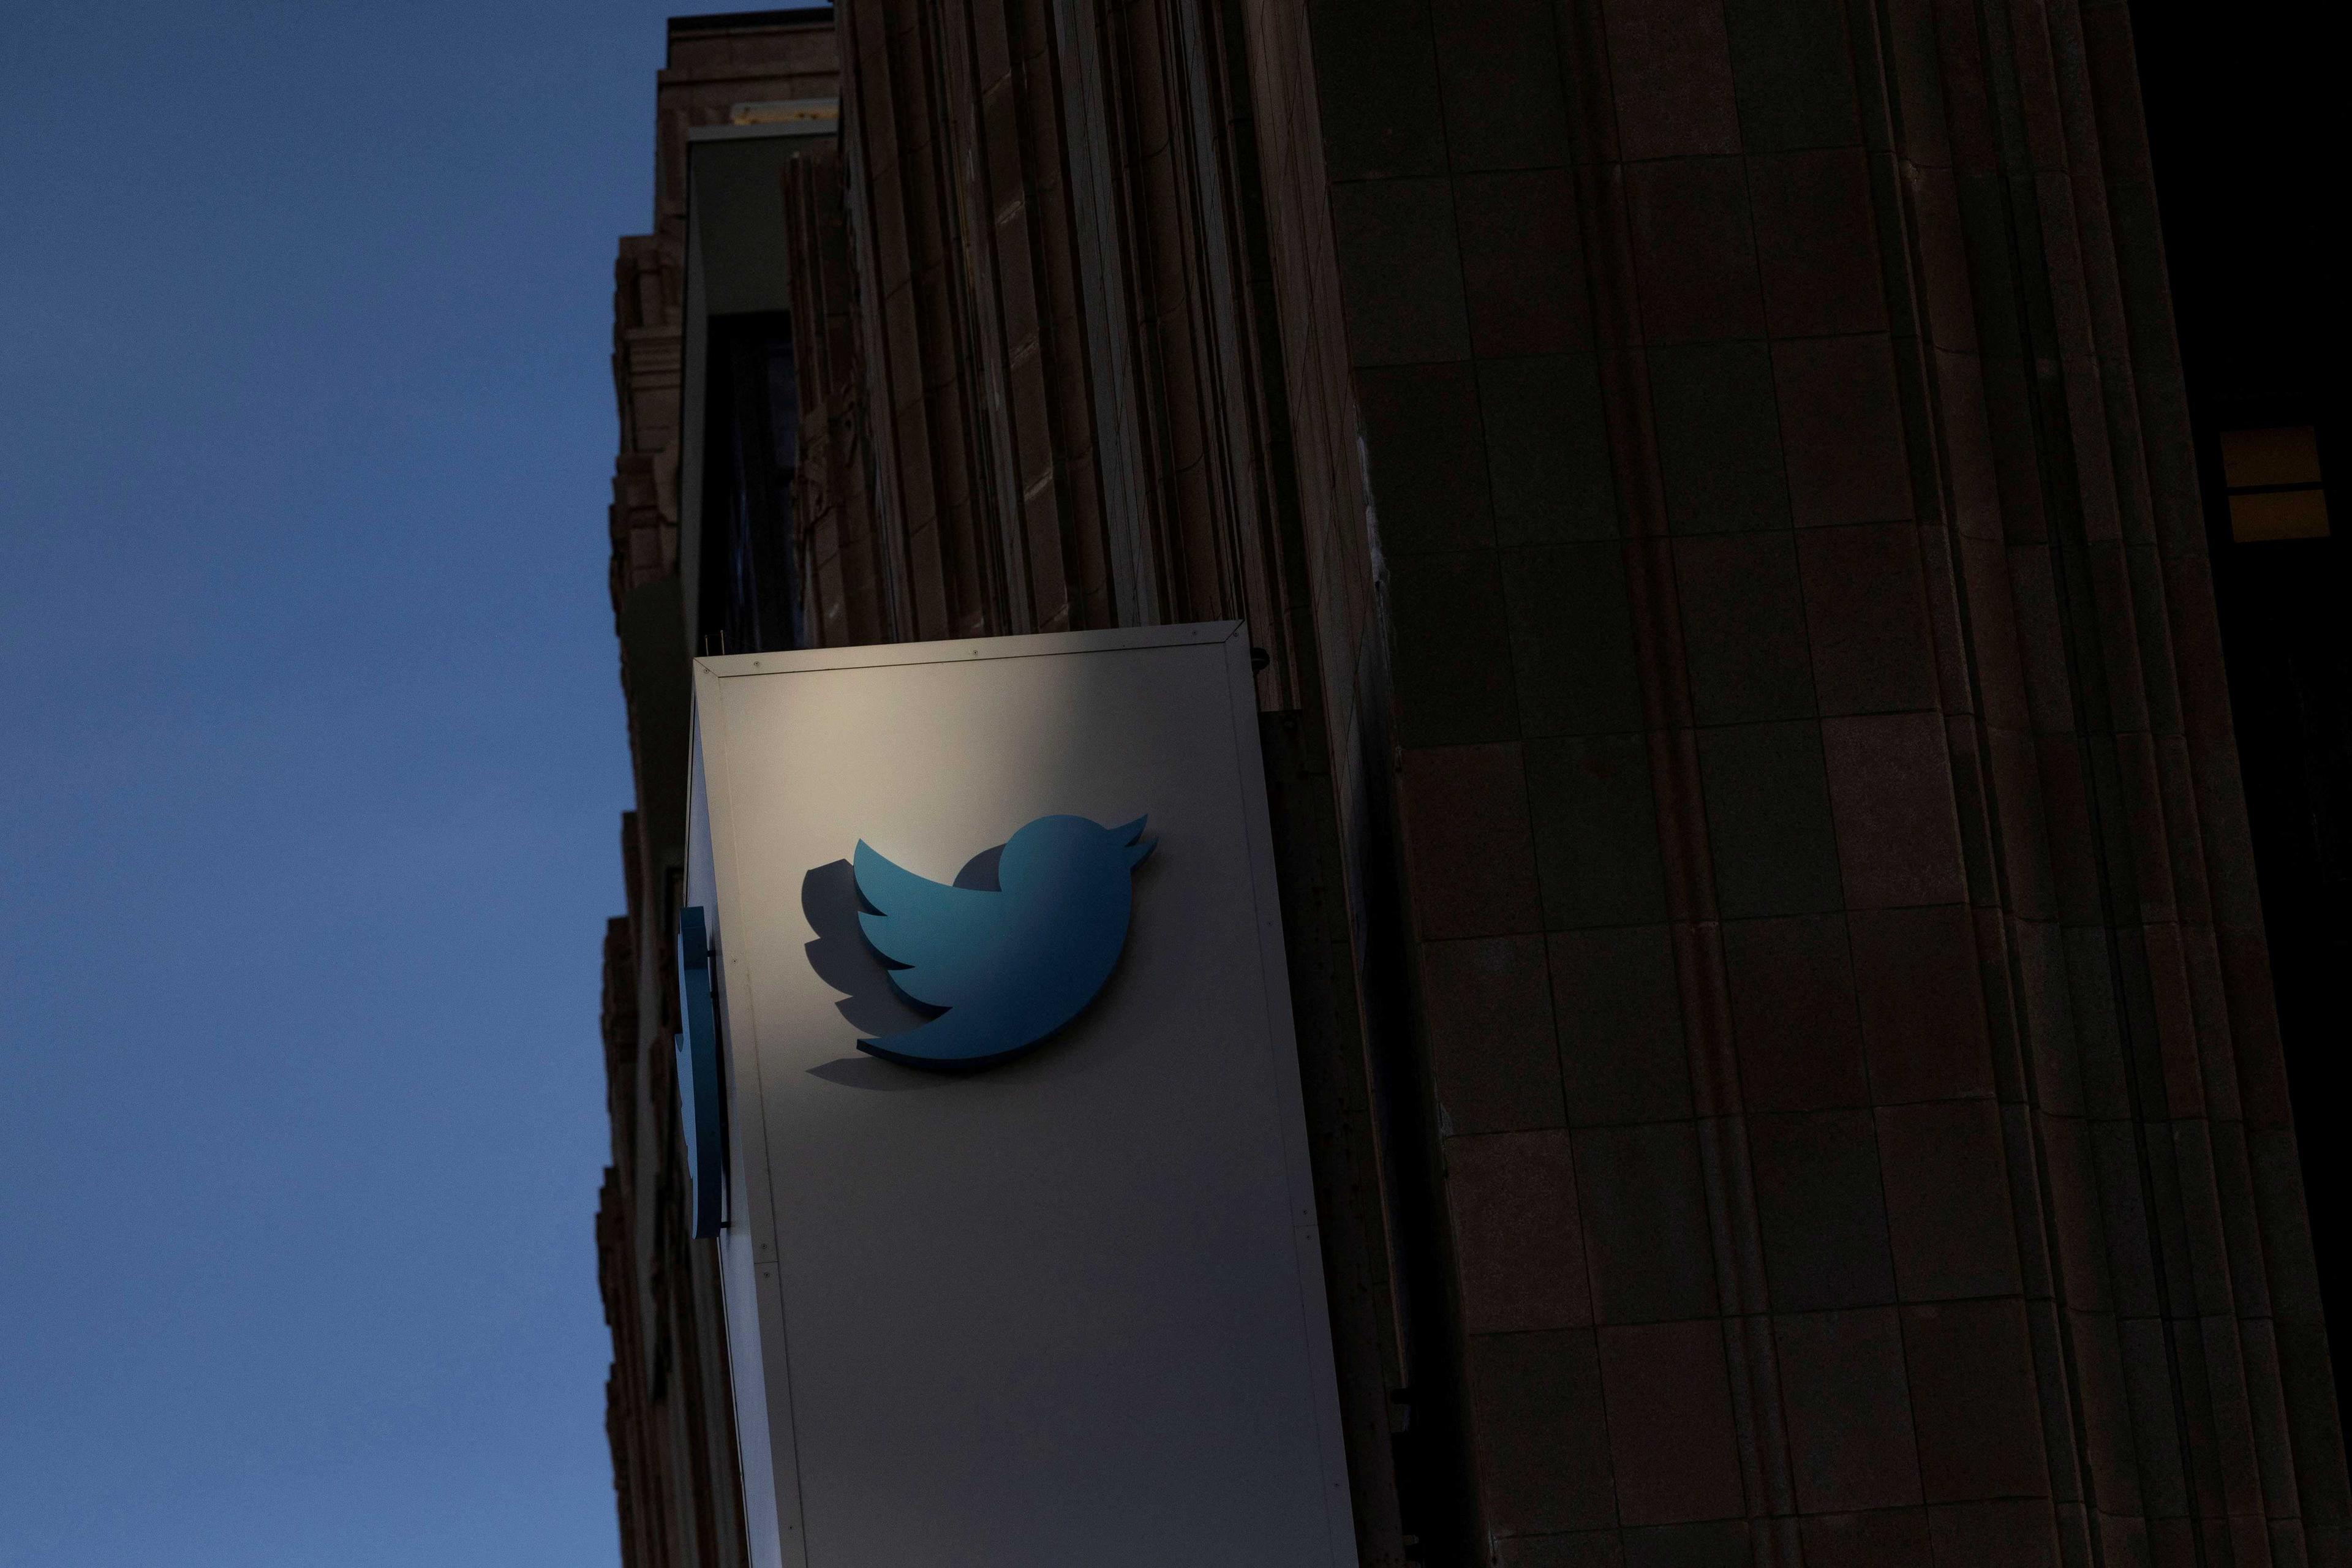 Twitter corporate headquarters building is seen in downtown San Francisco, California, US on Nov 21. Photo: Reuters